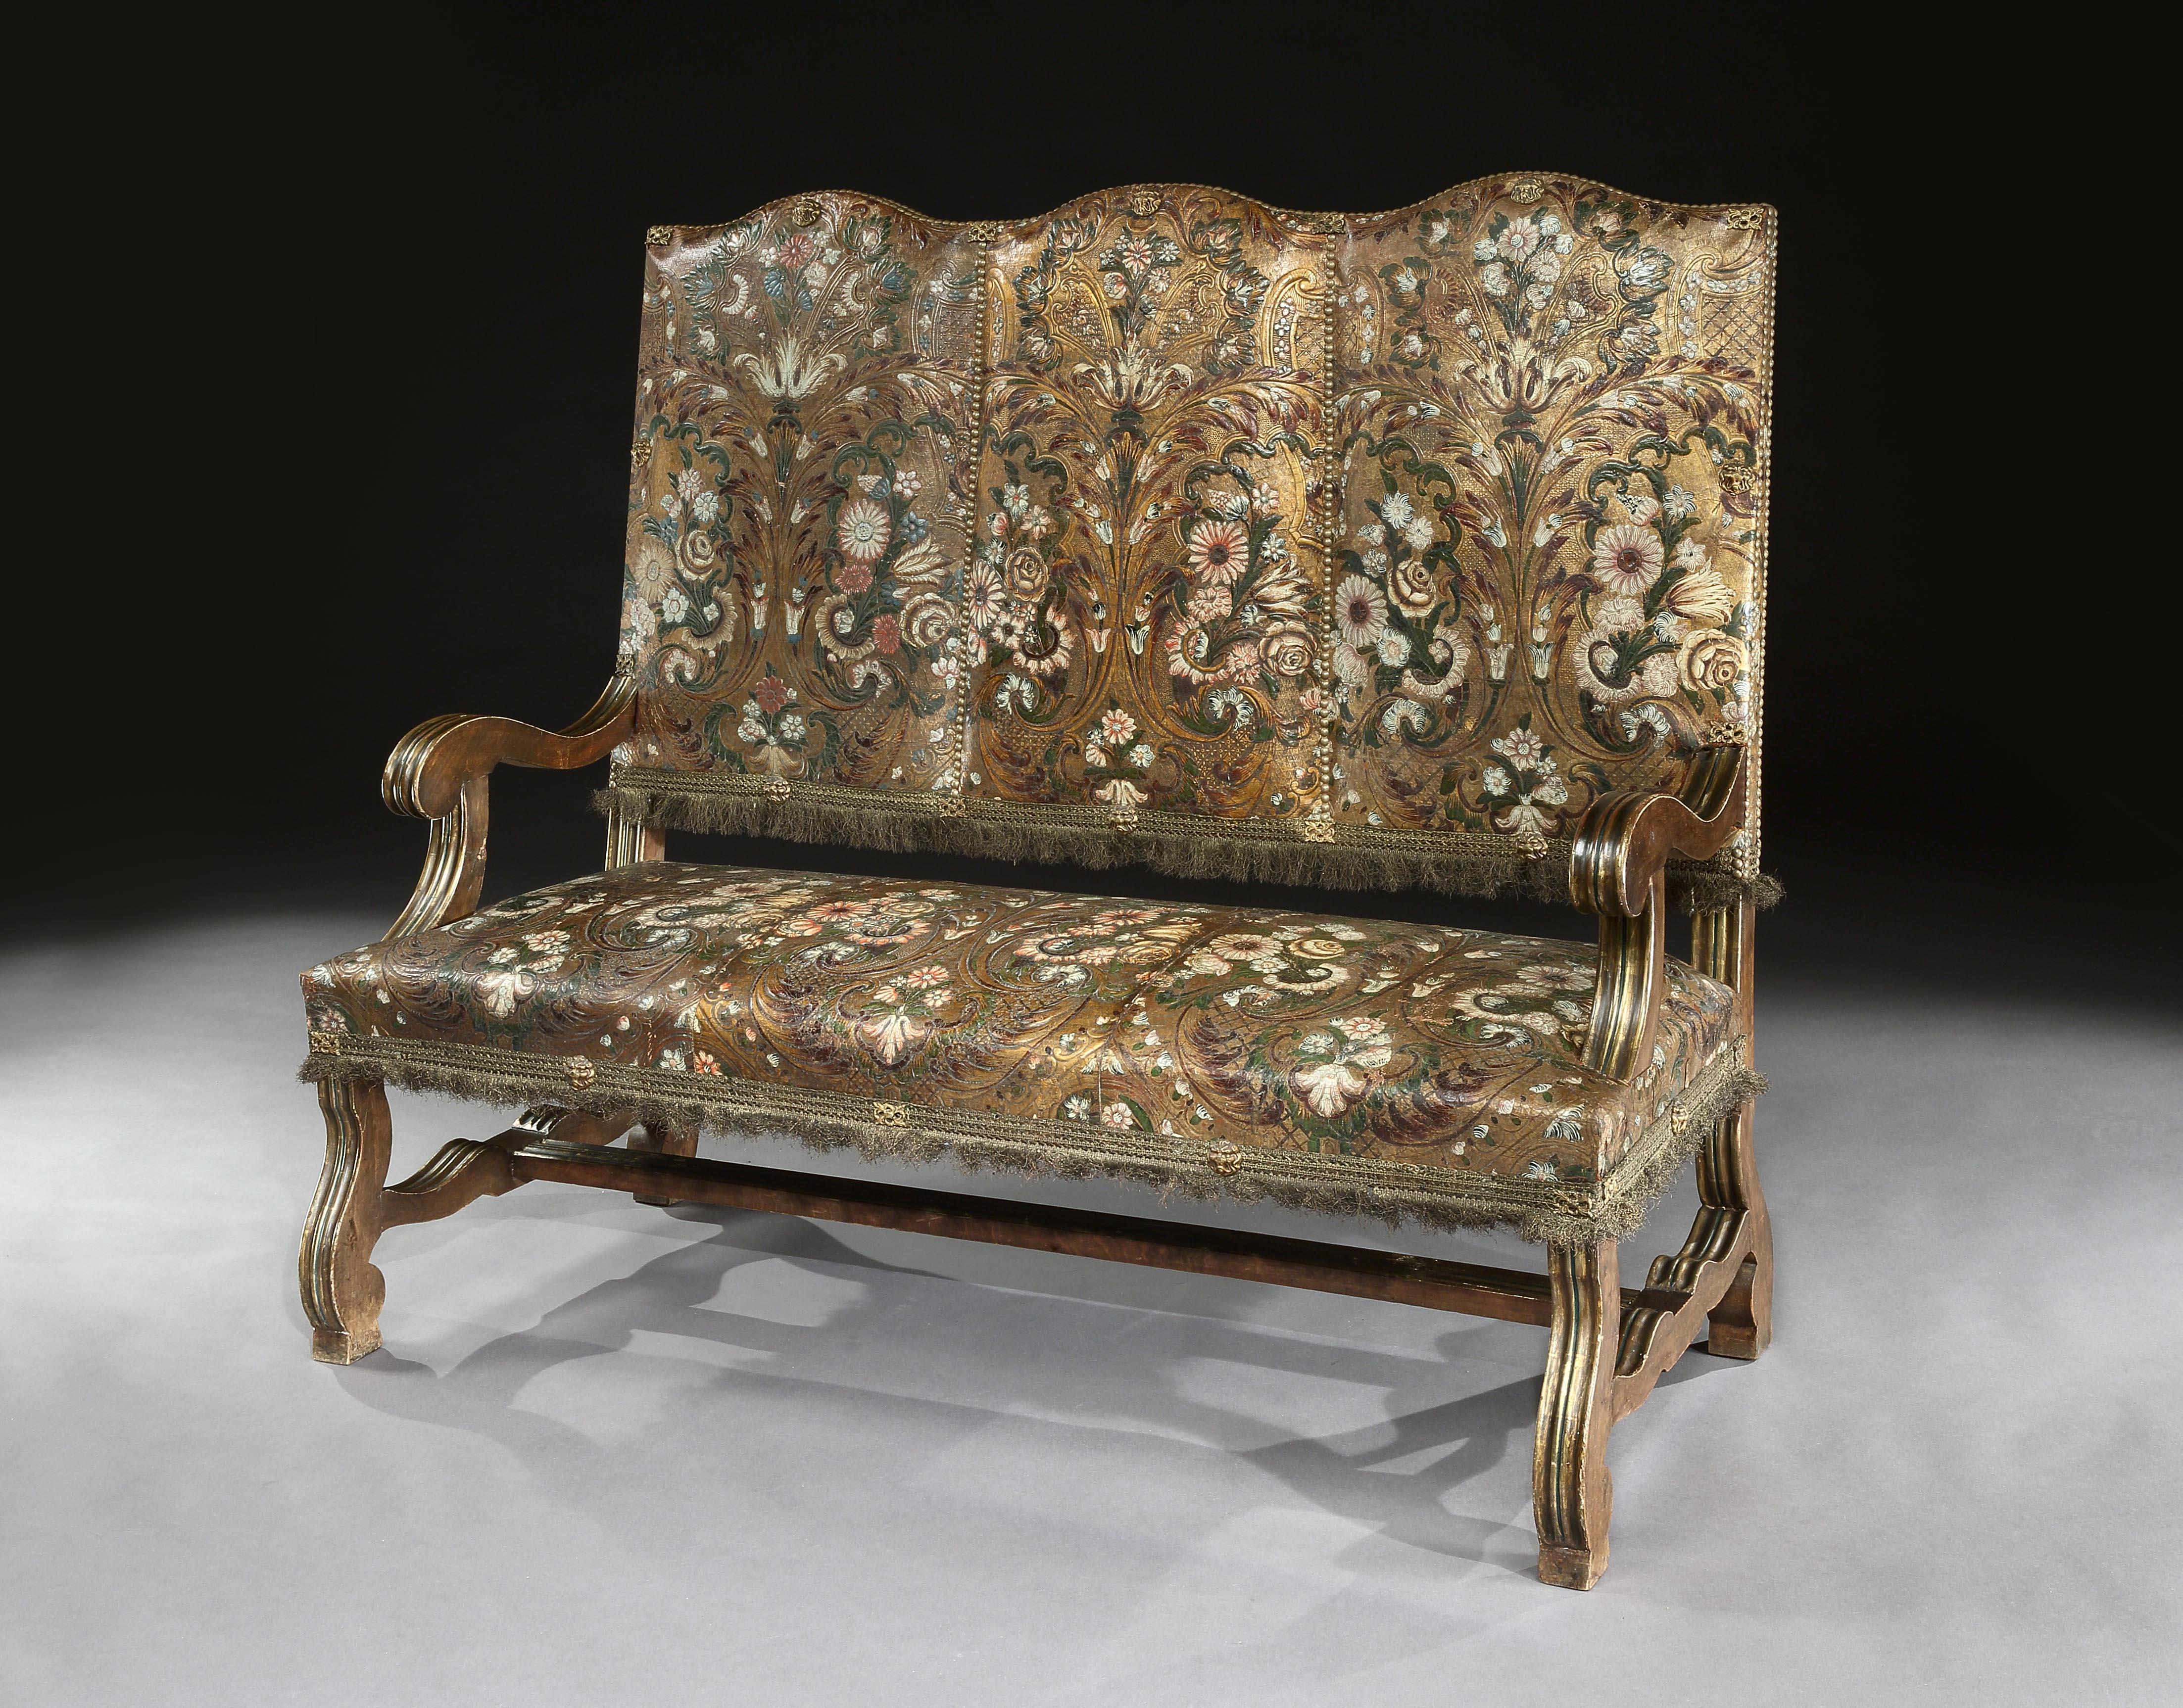 A unique, late-19th century, Spanish walnut & gilded, 3-seat, settee upholstered in exceptionally, rare, 18th century, polychrome & gilded leather panels

- A beautiful statement & conversation piece injecting gravitas, atmosphere and charm to any